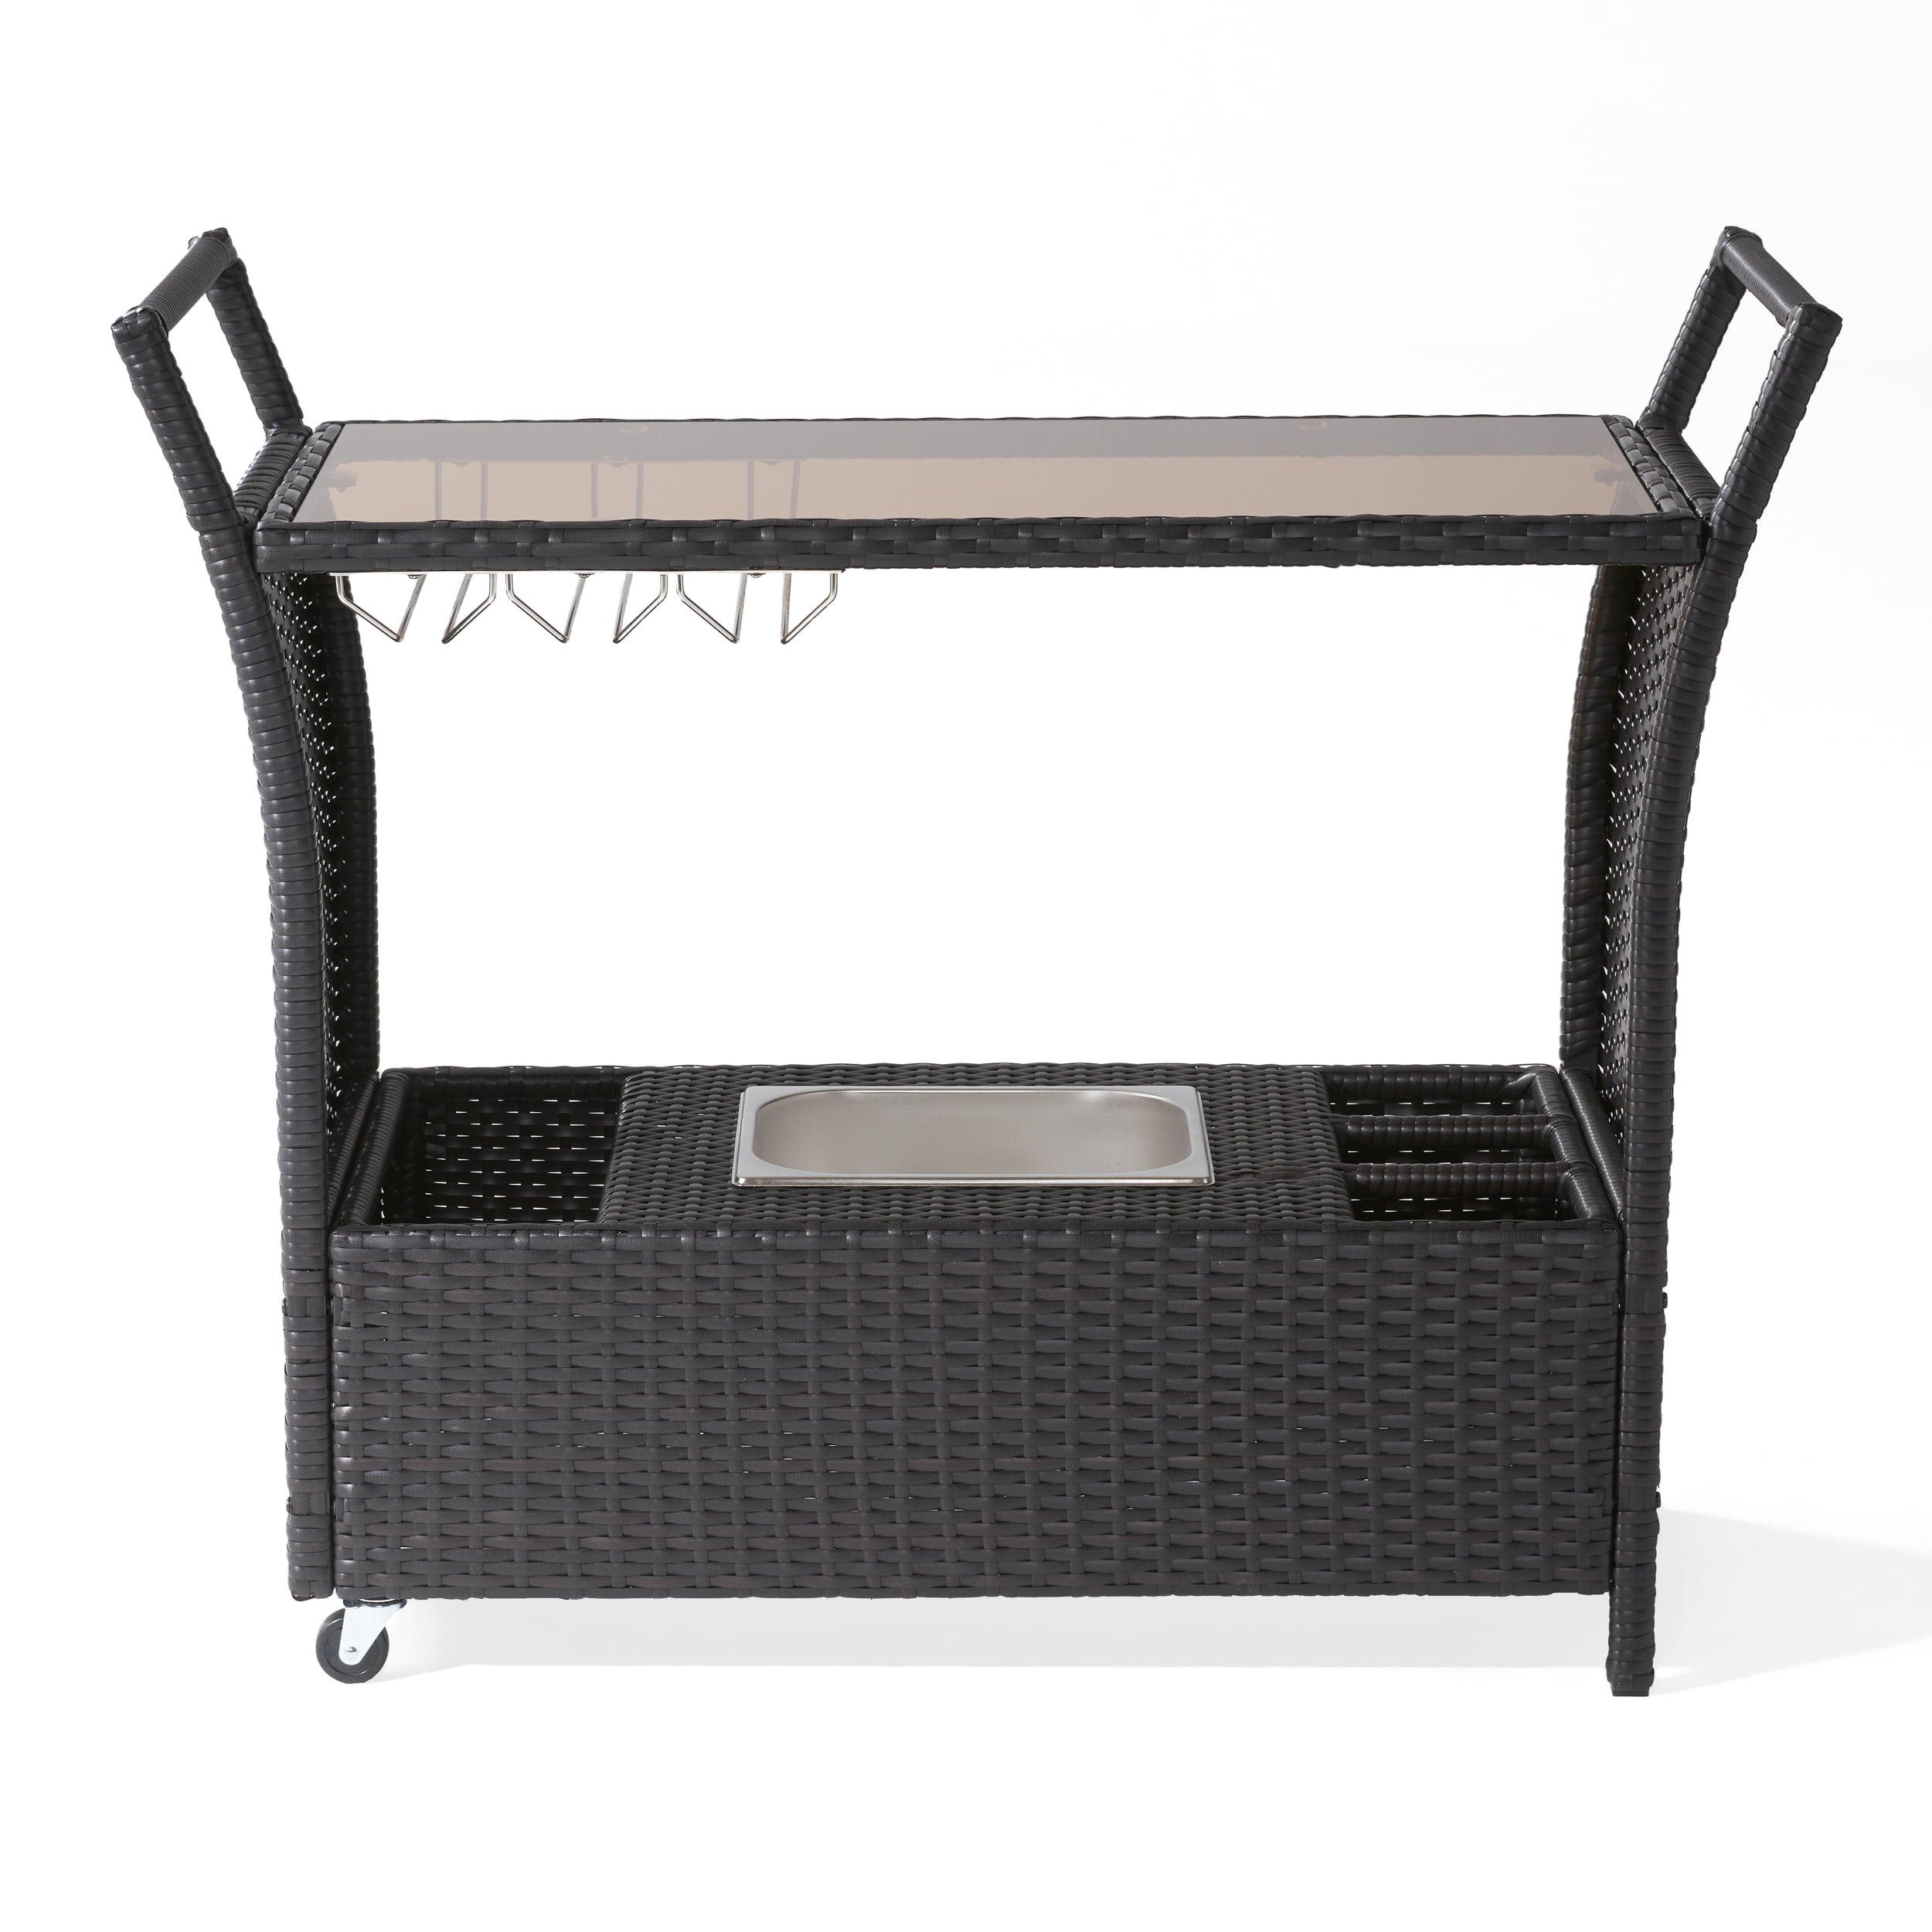 Black Patio Bar Carts for The Home Cart on Wheels with Wine Rack Patio Furniture Black PE Rattan Portable Bar Serving Cart with Stainless Ice Bucket Buttom Storage Glass Top 